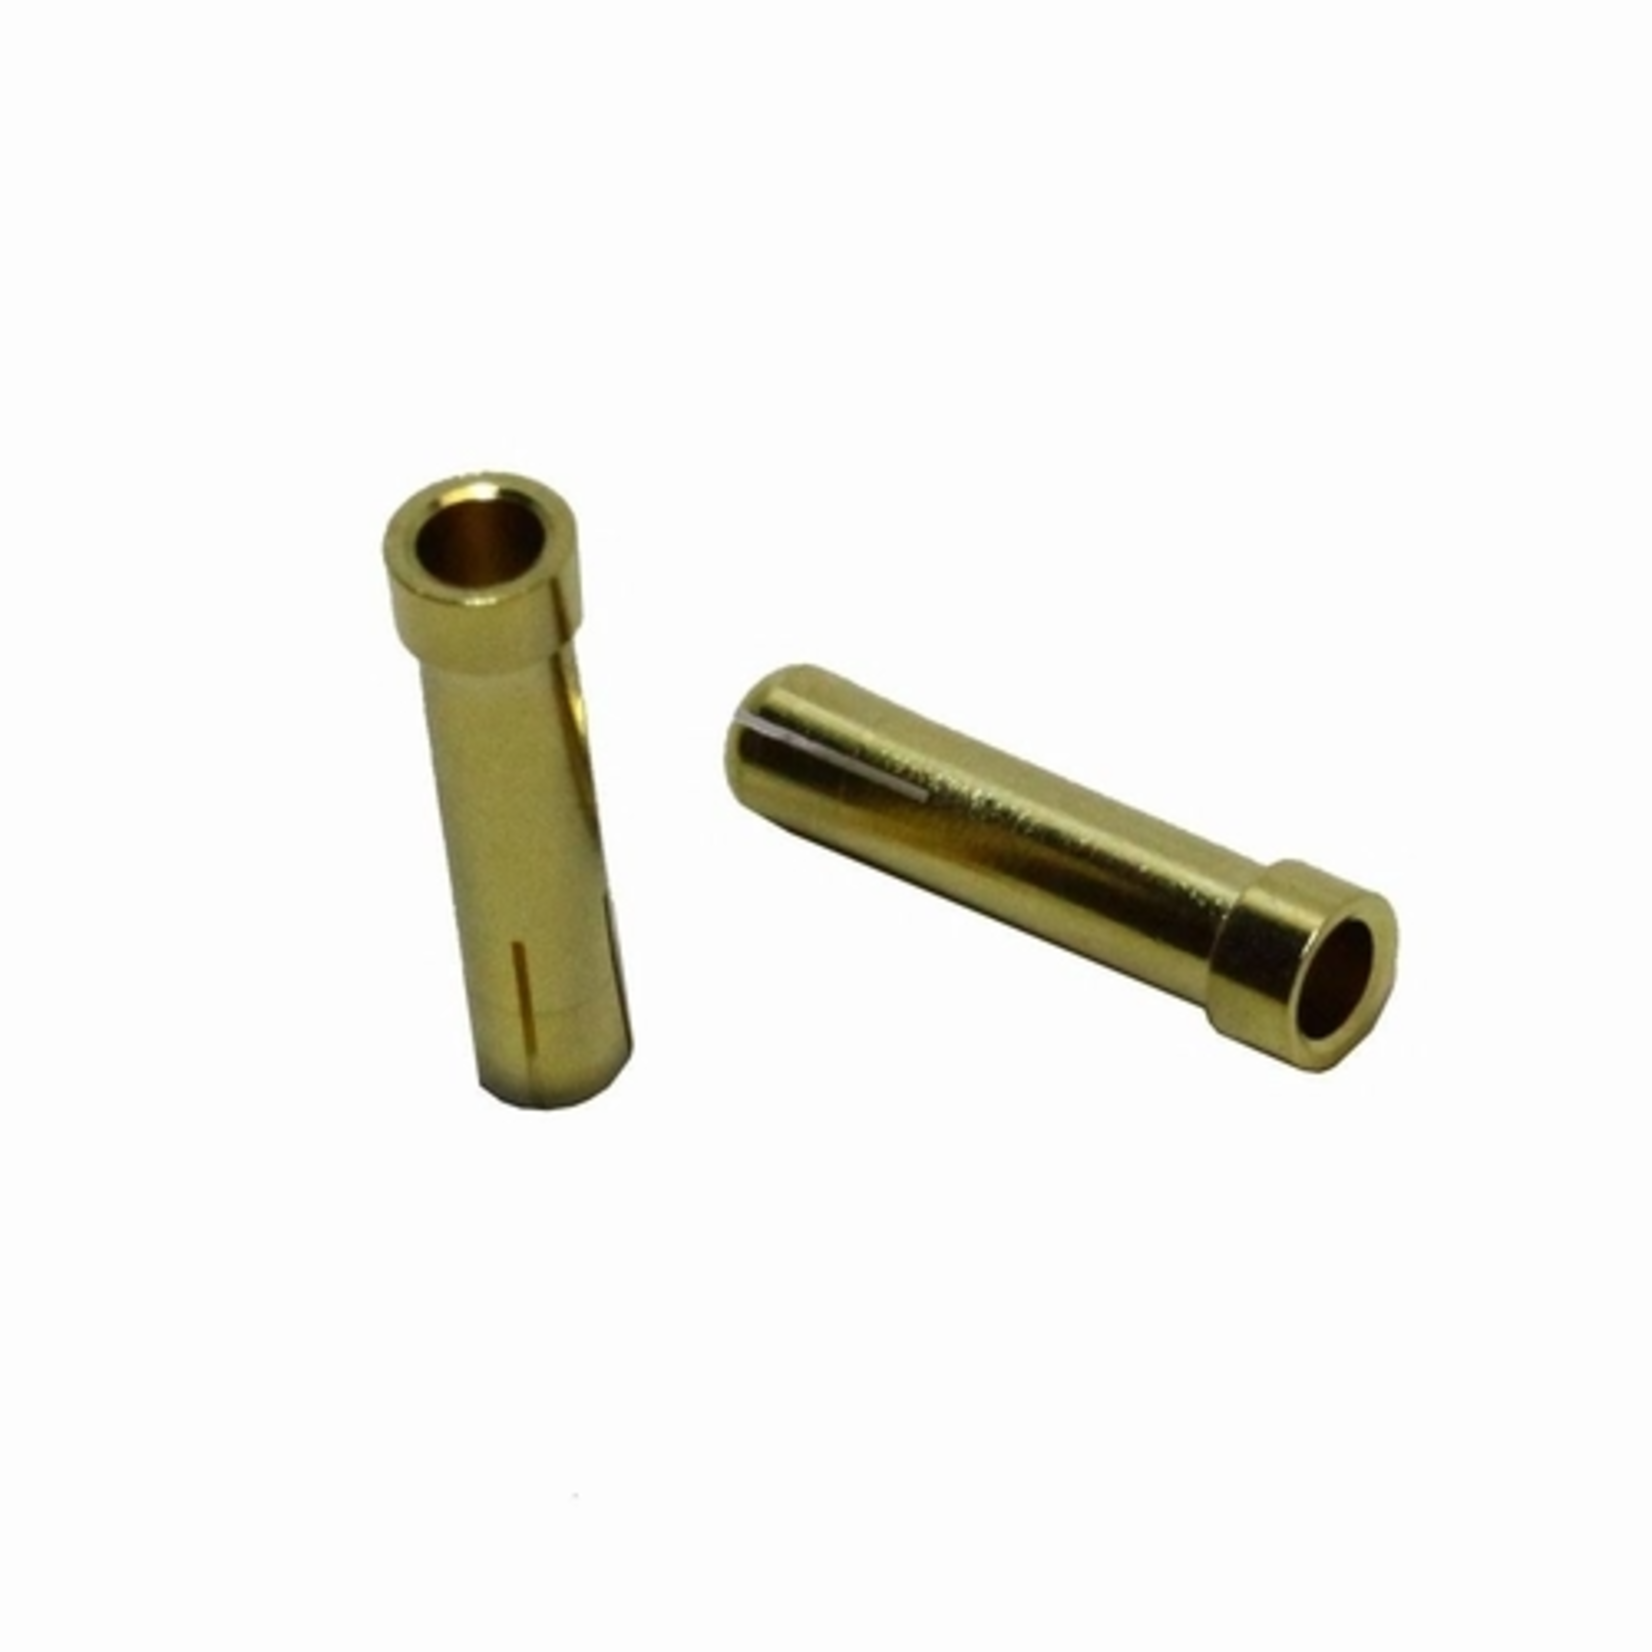 Maclan Maclan Max Current 5mm to 4mm Bullet Reducer (2) #MCL4168